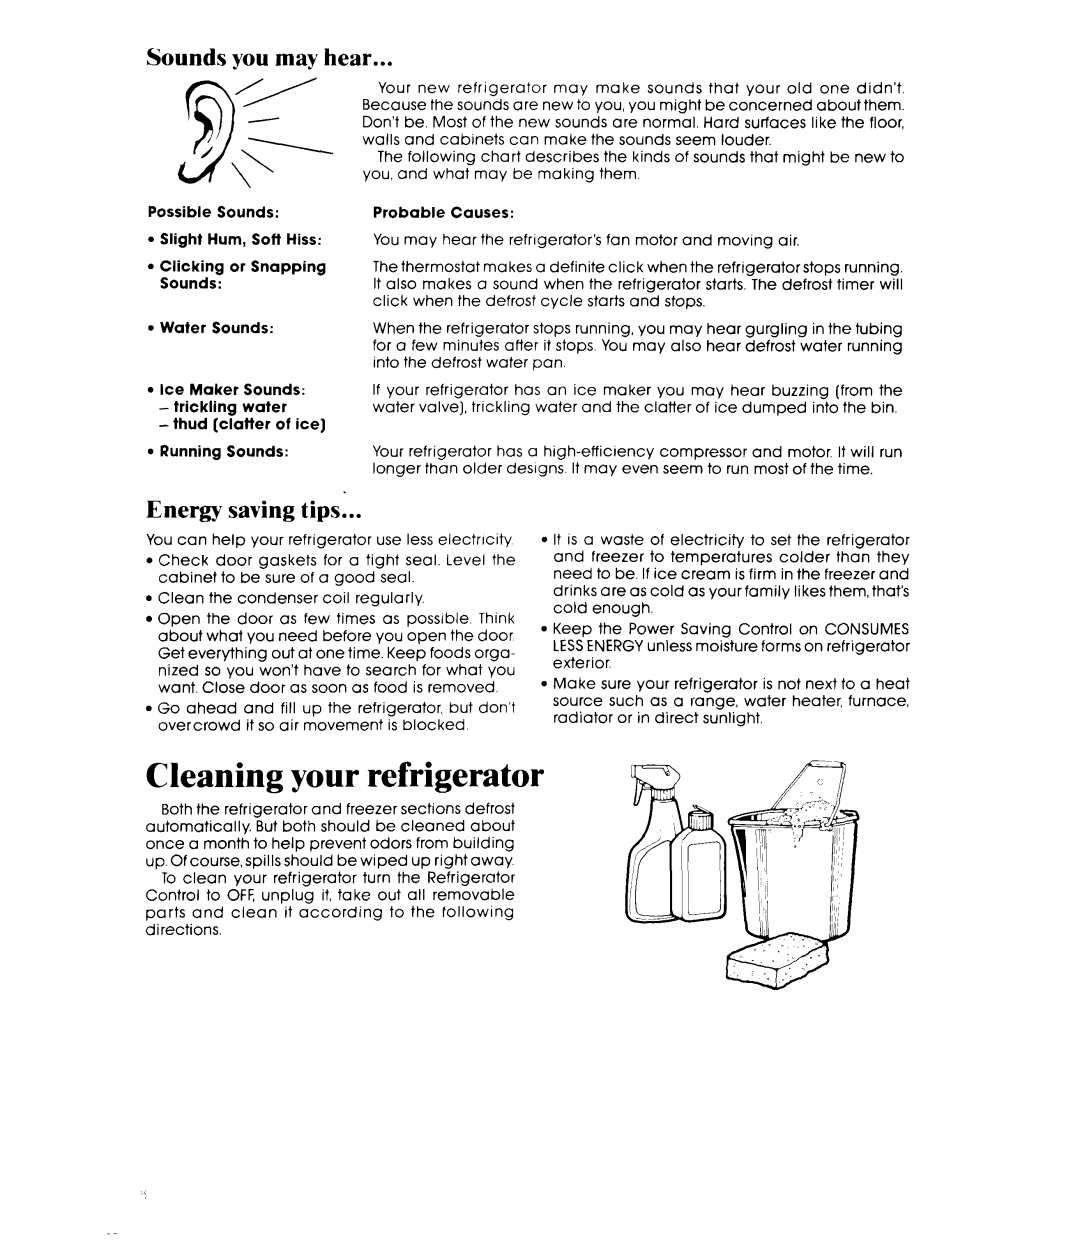 Whirlpool ET18HK, ETl8GK manual Cleaning your refrigerator, Sounds you may hear, Energy saving tips 